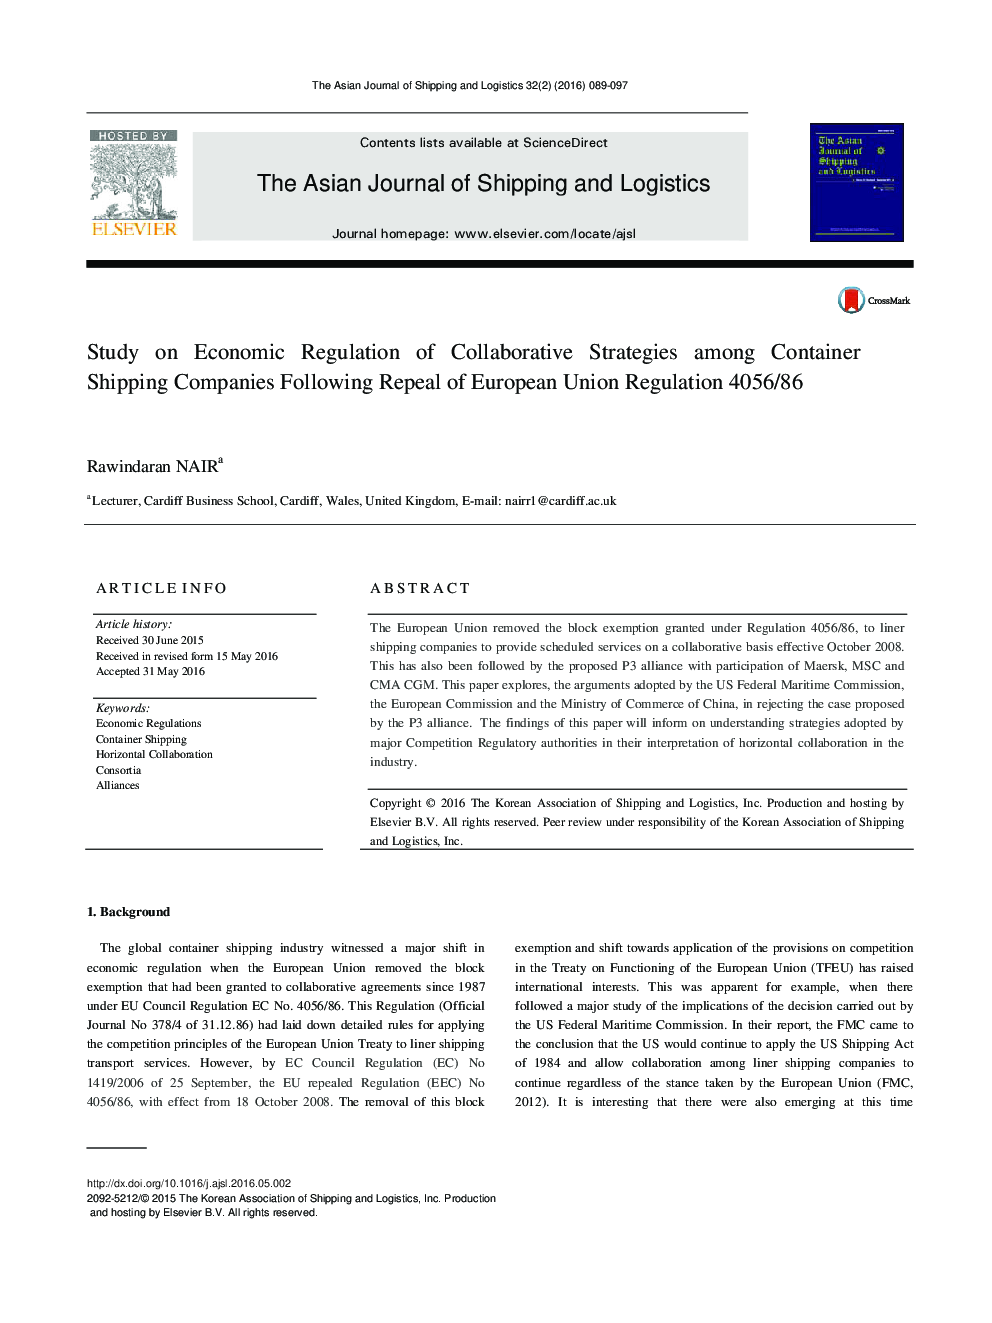 Study on Economic Regulation of Collaborative Strategies among Container Shipping Companies Following Repeal of European Union Regulation 4056/86 